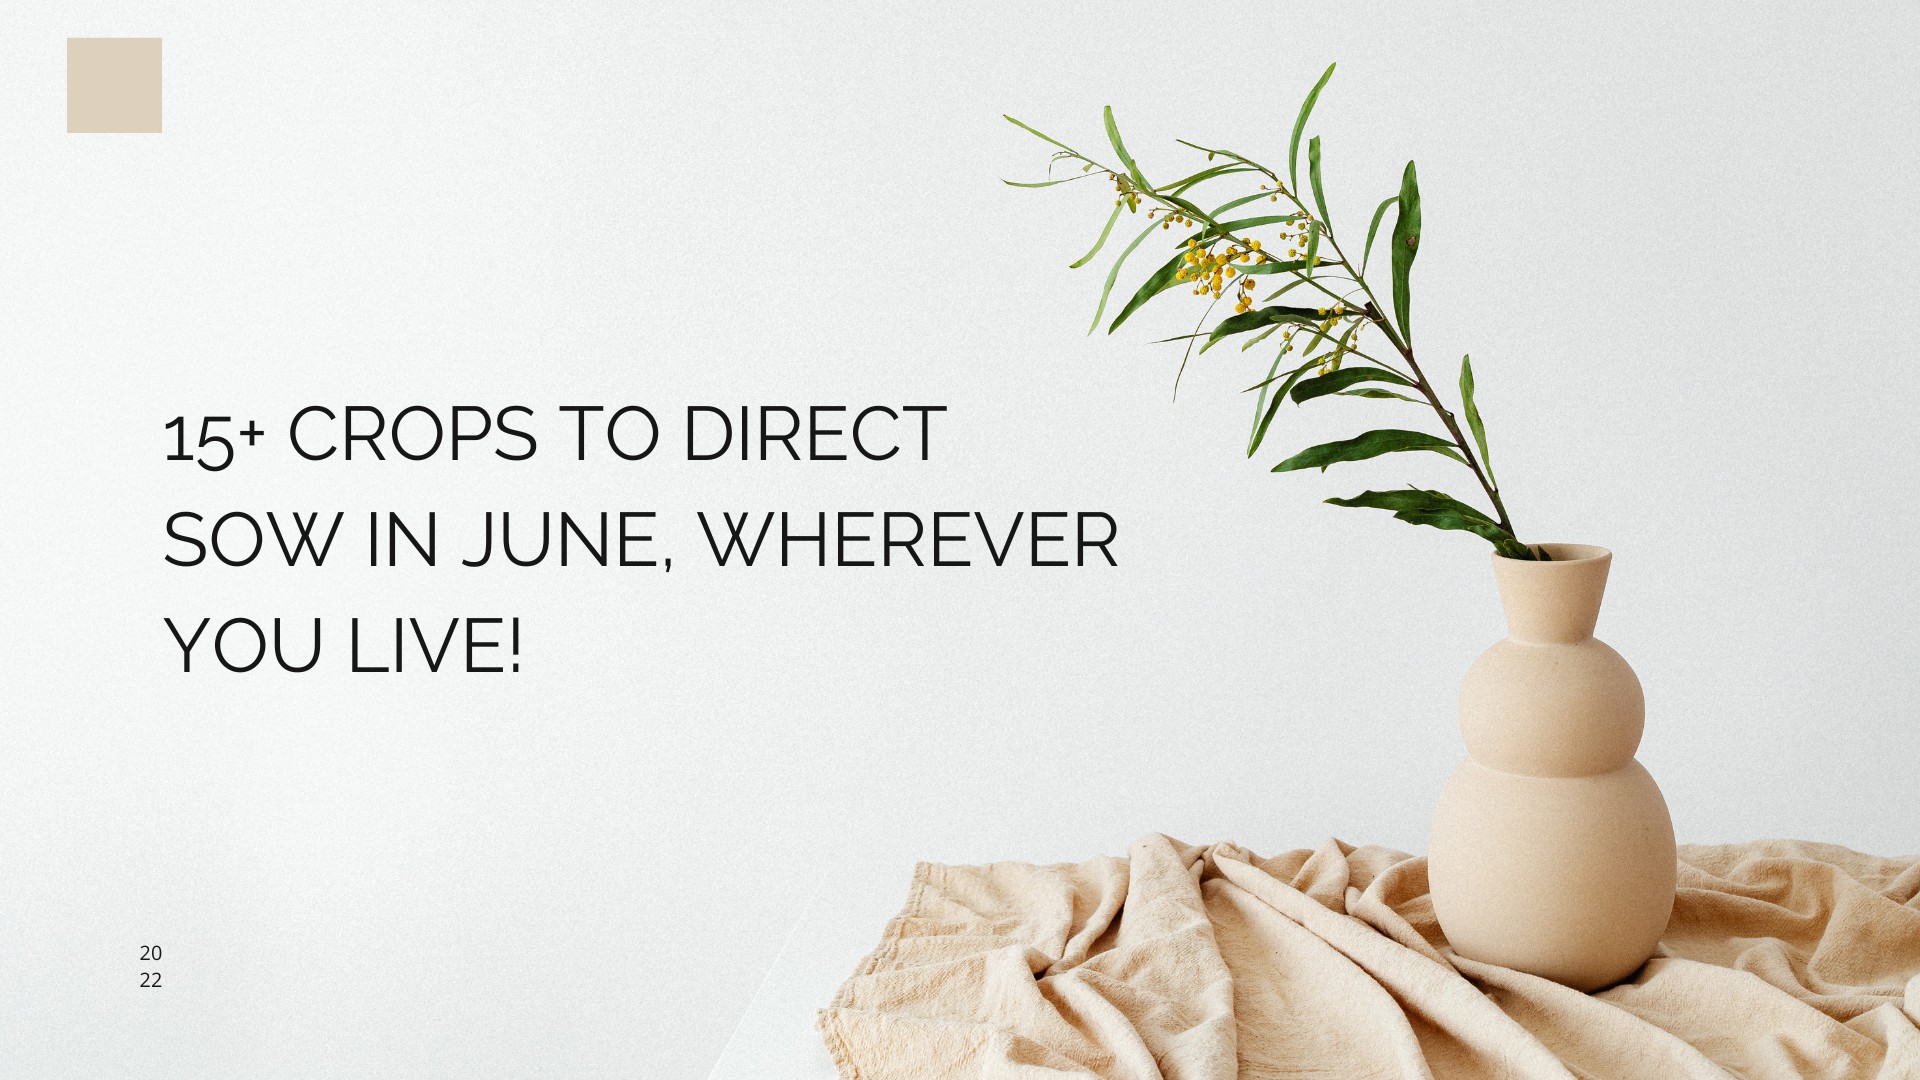 15+ Crops to Direct Sow in June, Wherever You Live!